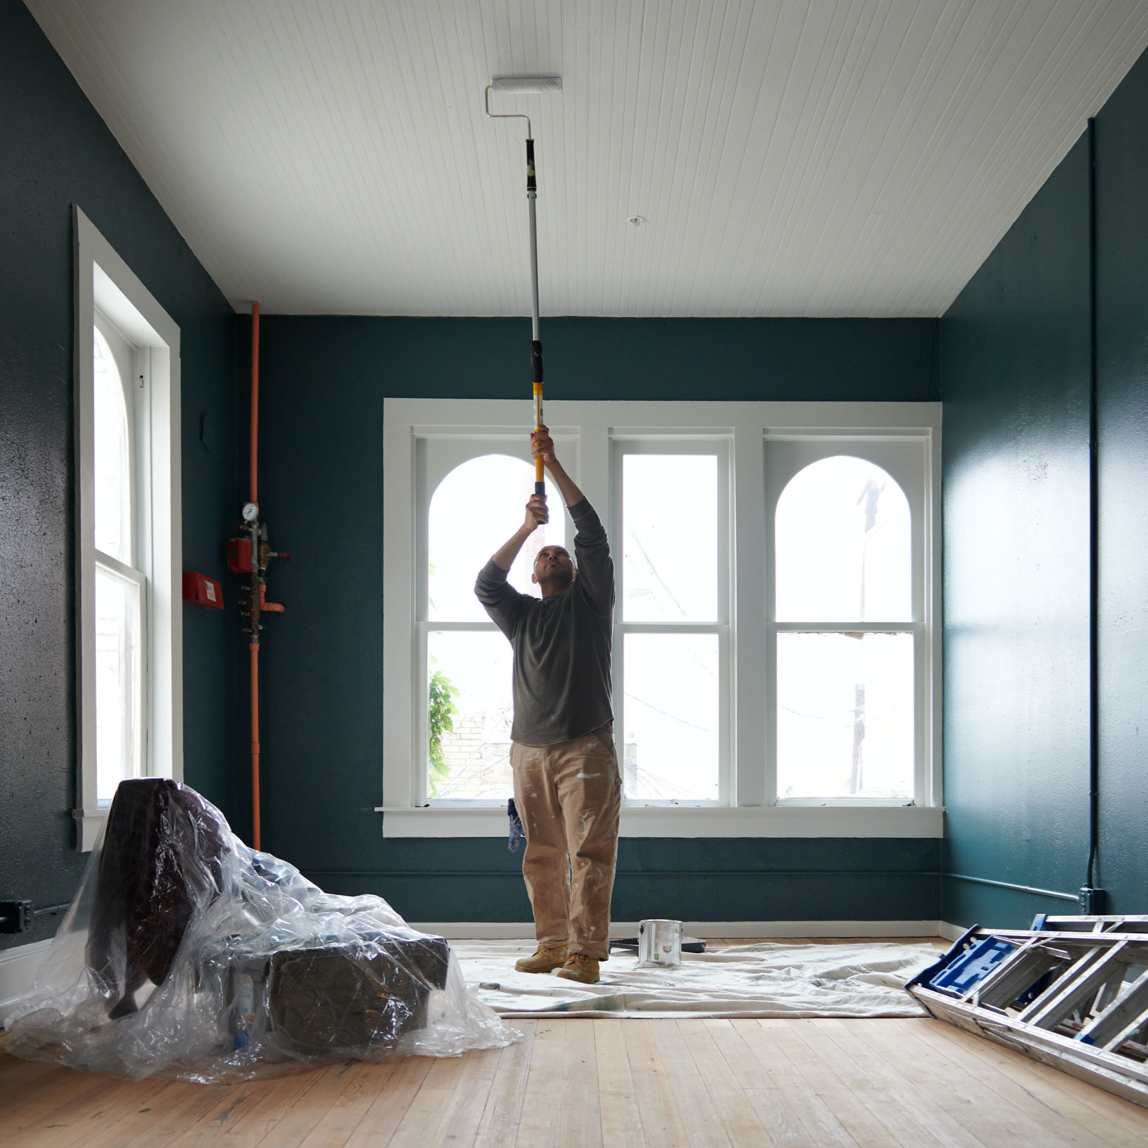 Person in a large room with windows using a roller on an extension pole to paint the ceiling.